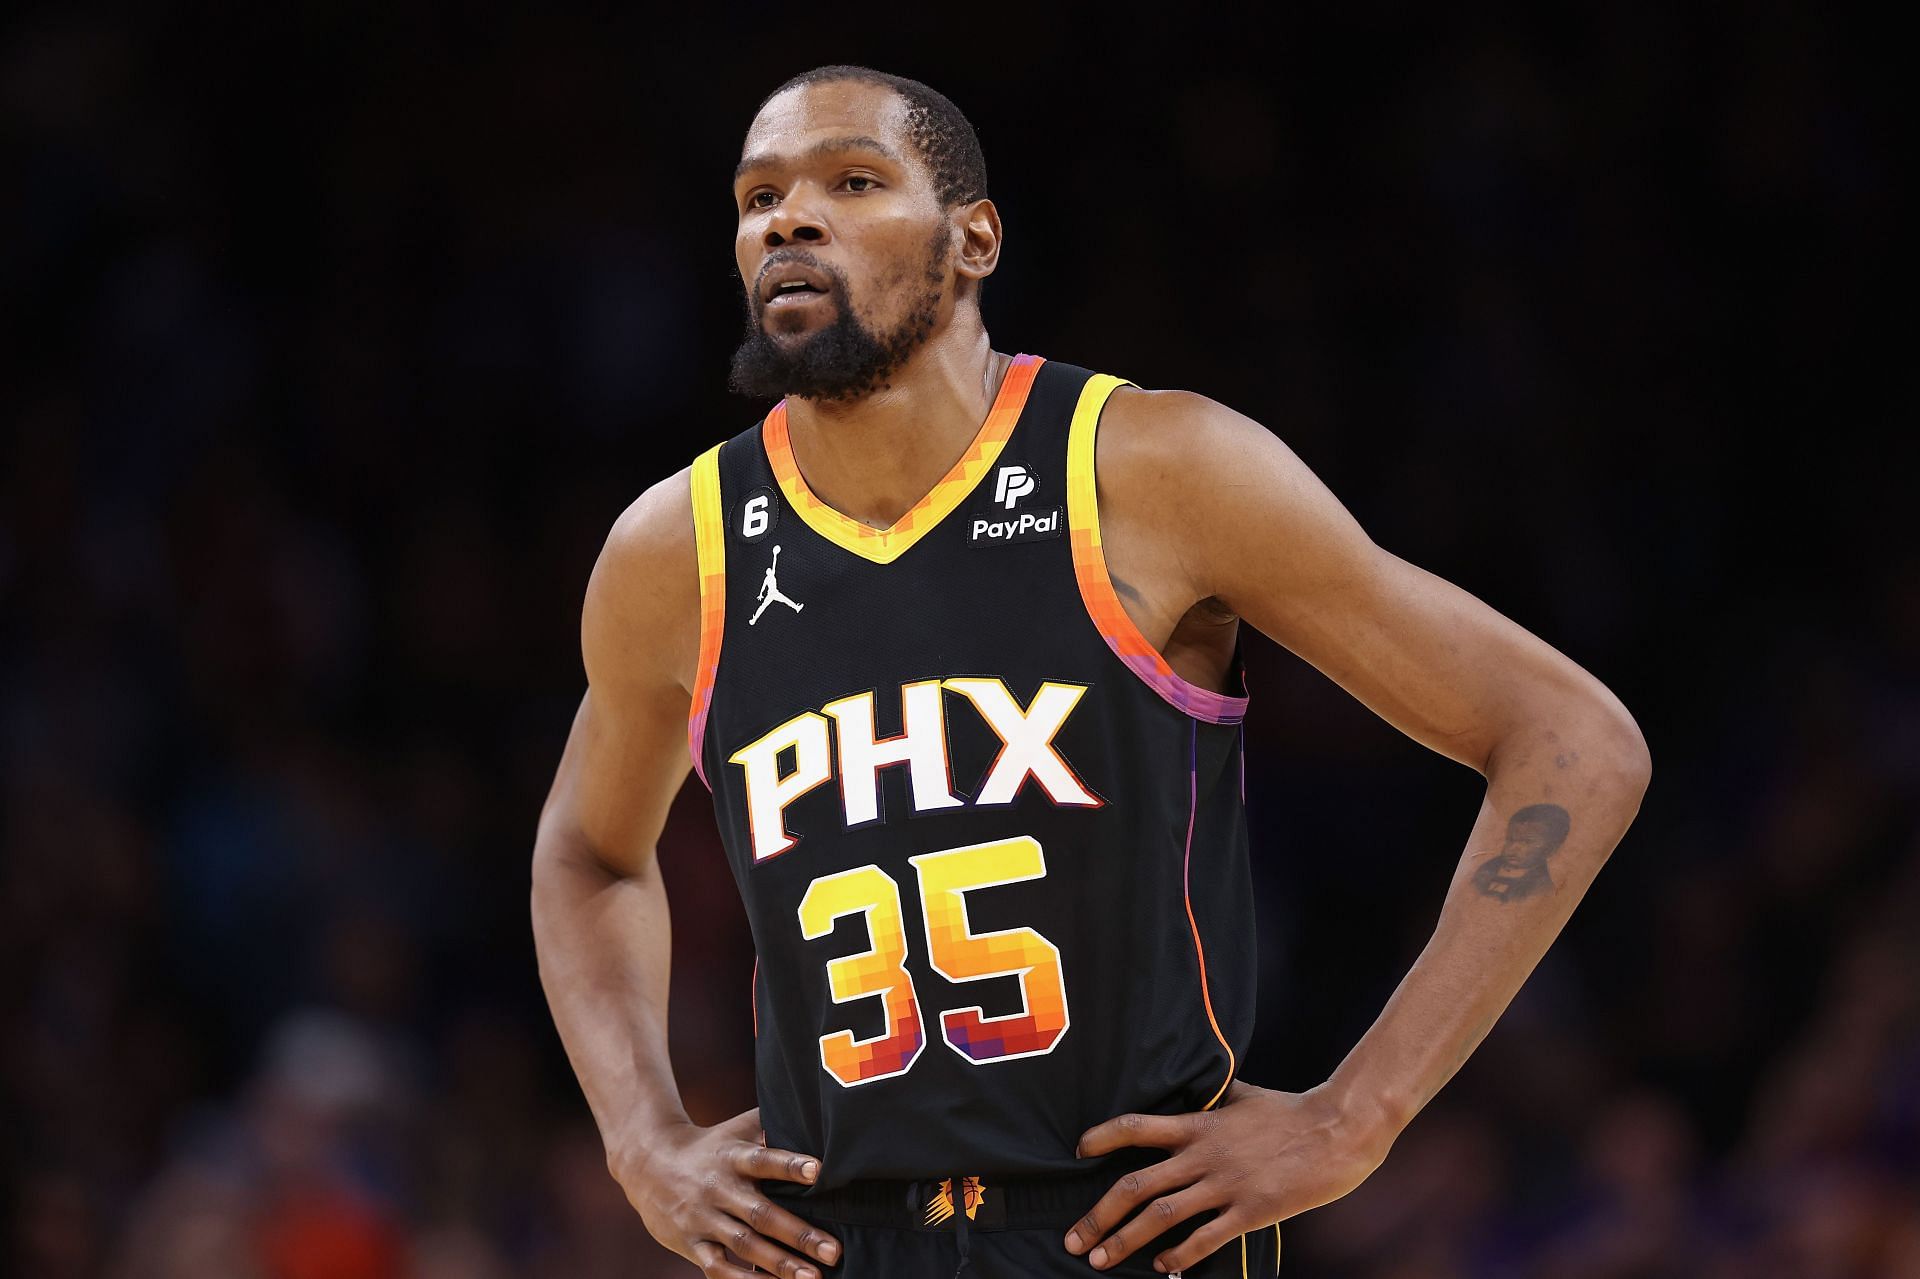 Durant is active, yet one of the richest players in NBA history